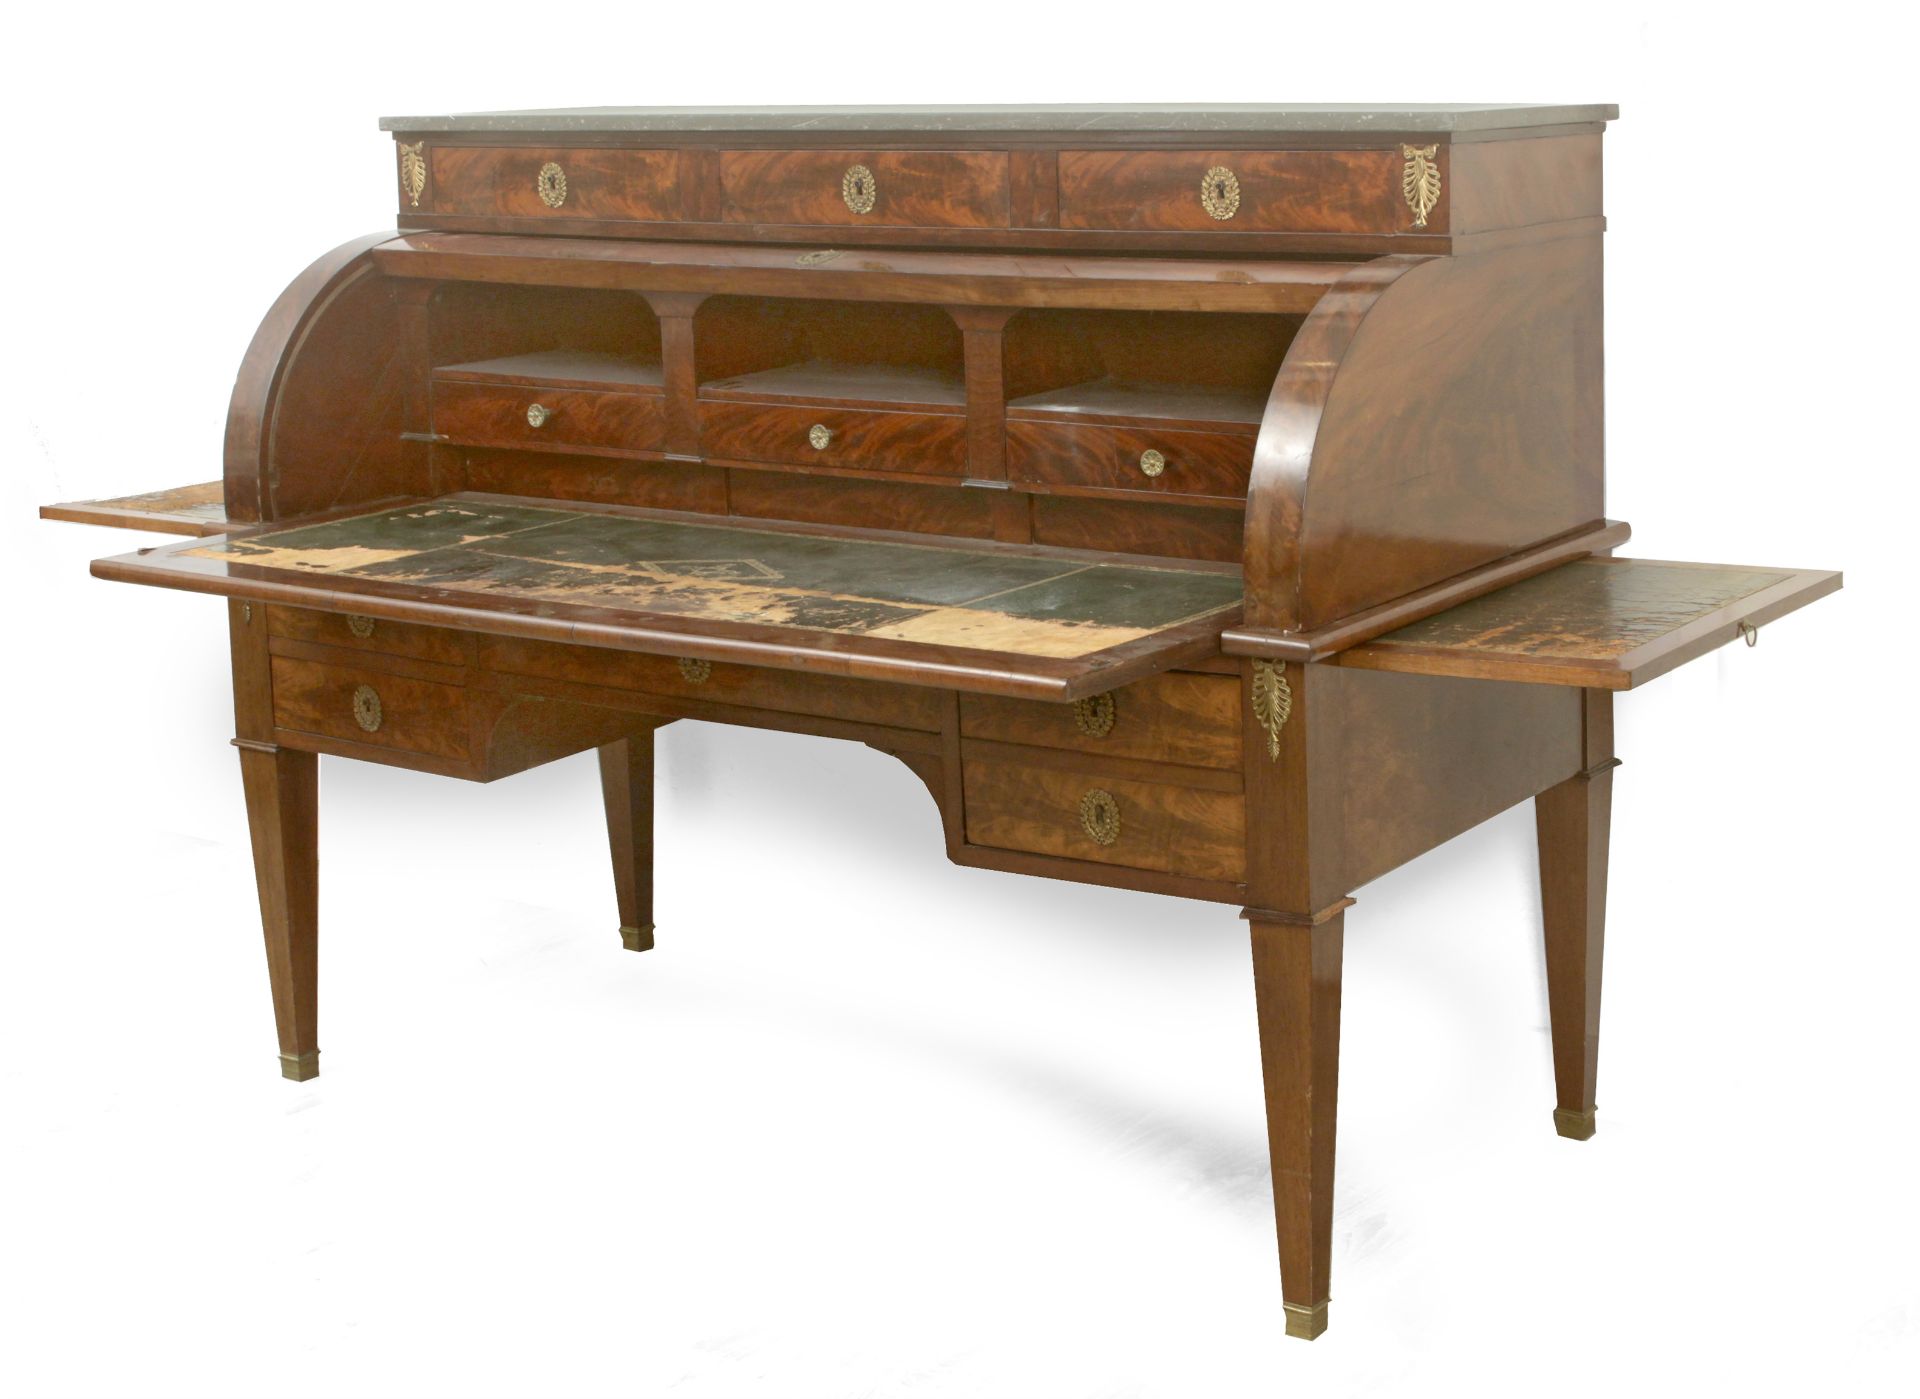 A French mahogany bureau from the First Empire (1804-1815)